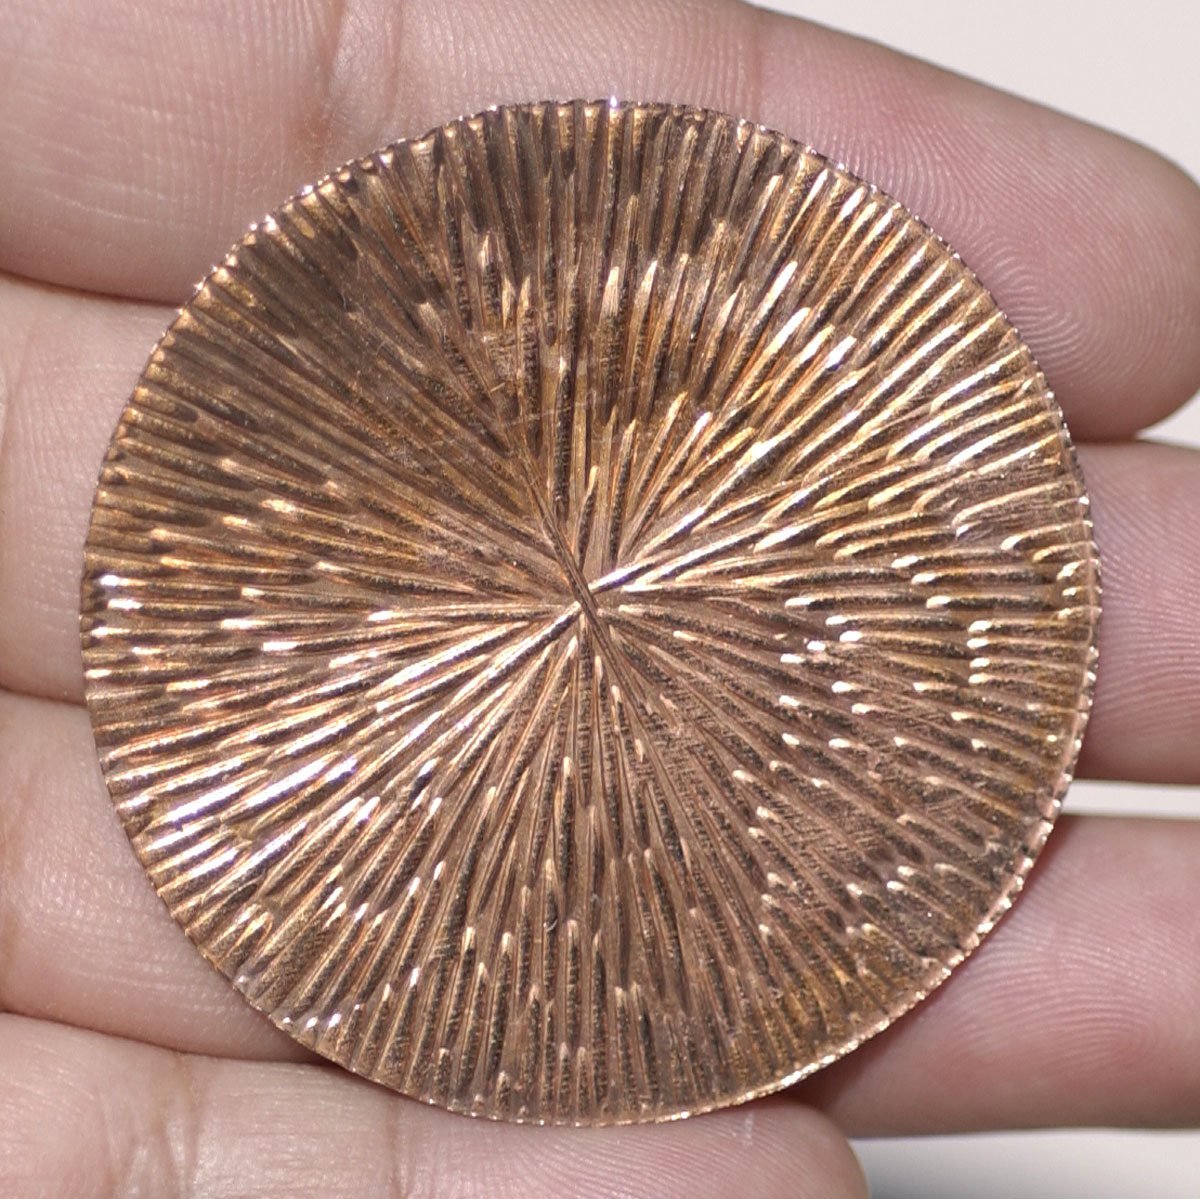 Stamping Blank Disc 42mm with Texture, Jewelry Supplies, Copper Metal 24G - 3 Pieces